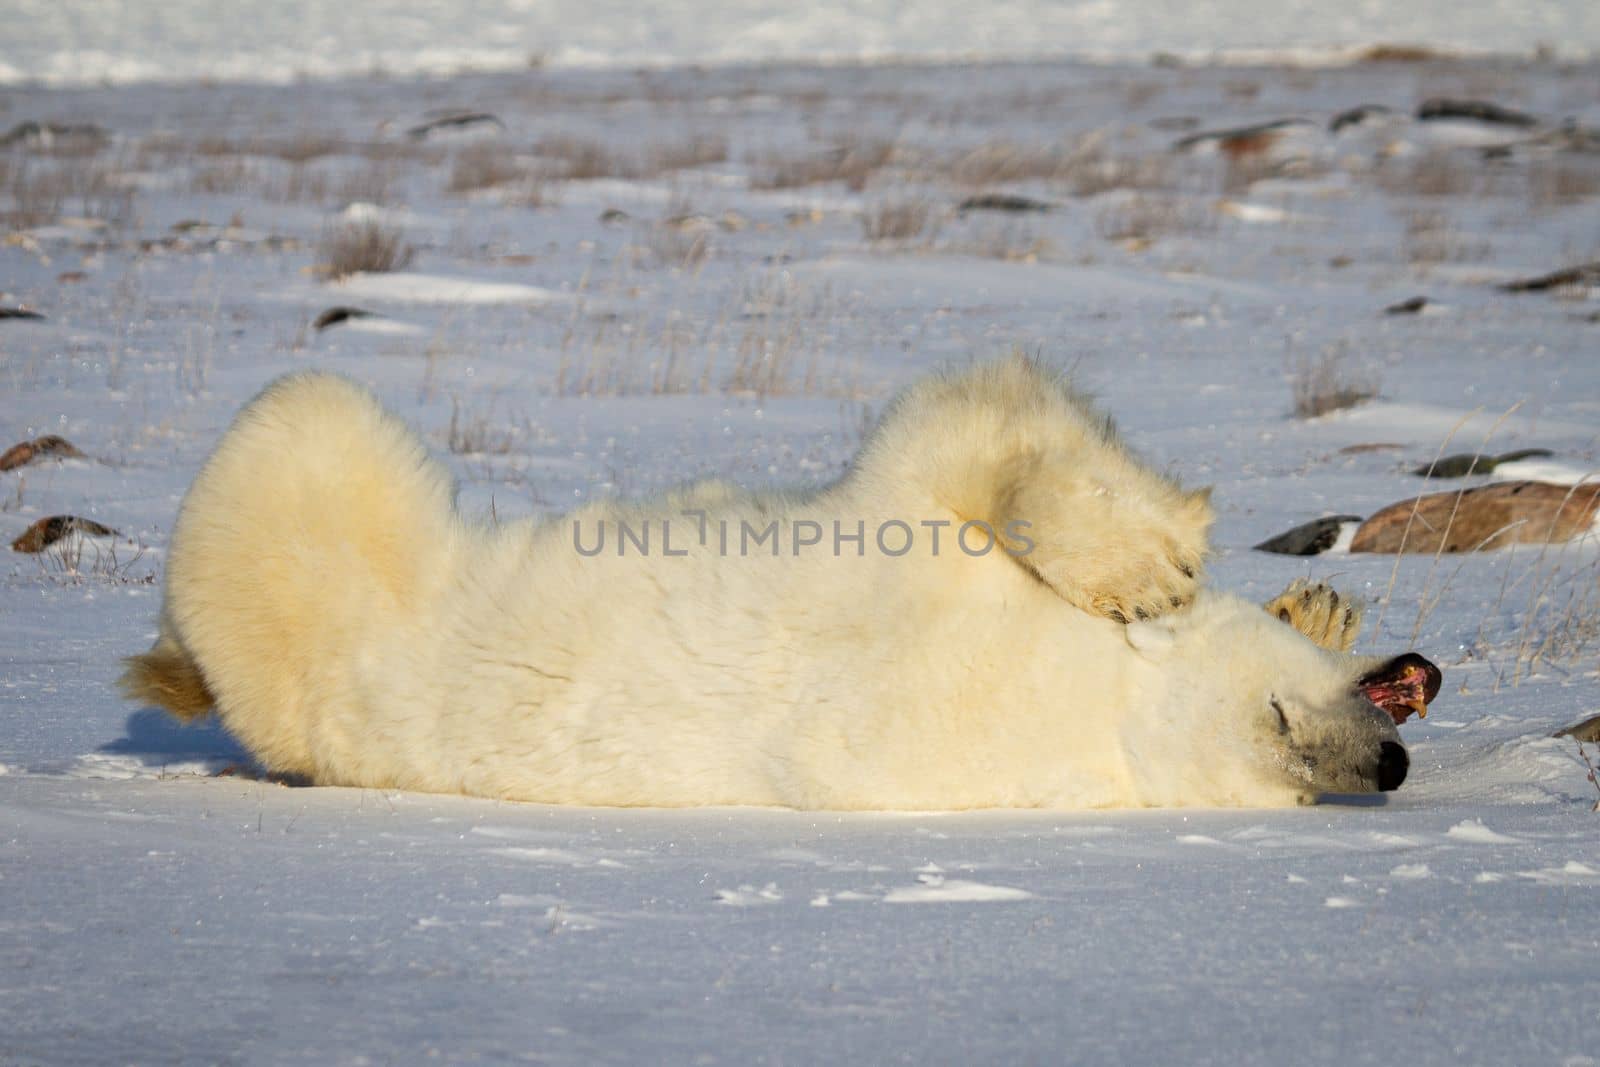 A polar bear rolling around in the snow with legs in the air while yawning or growling, near Churchill, Manitoba Canada